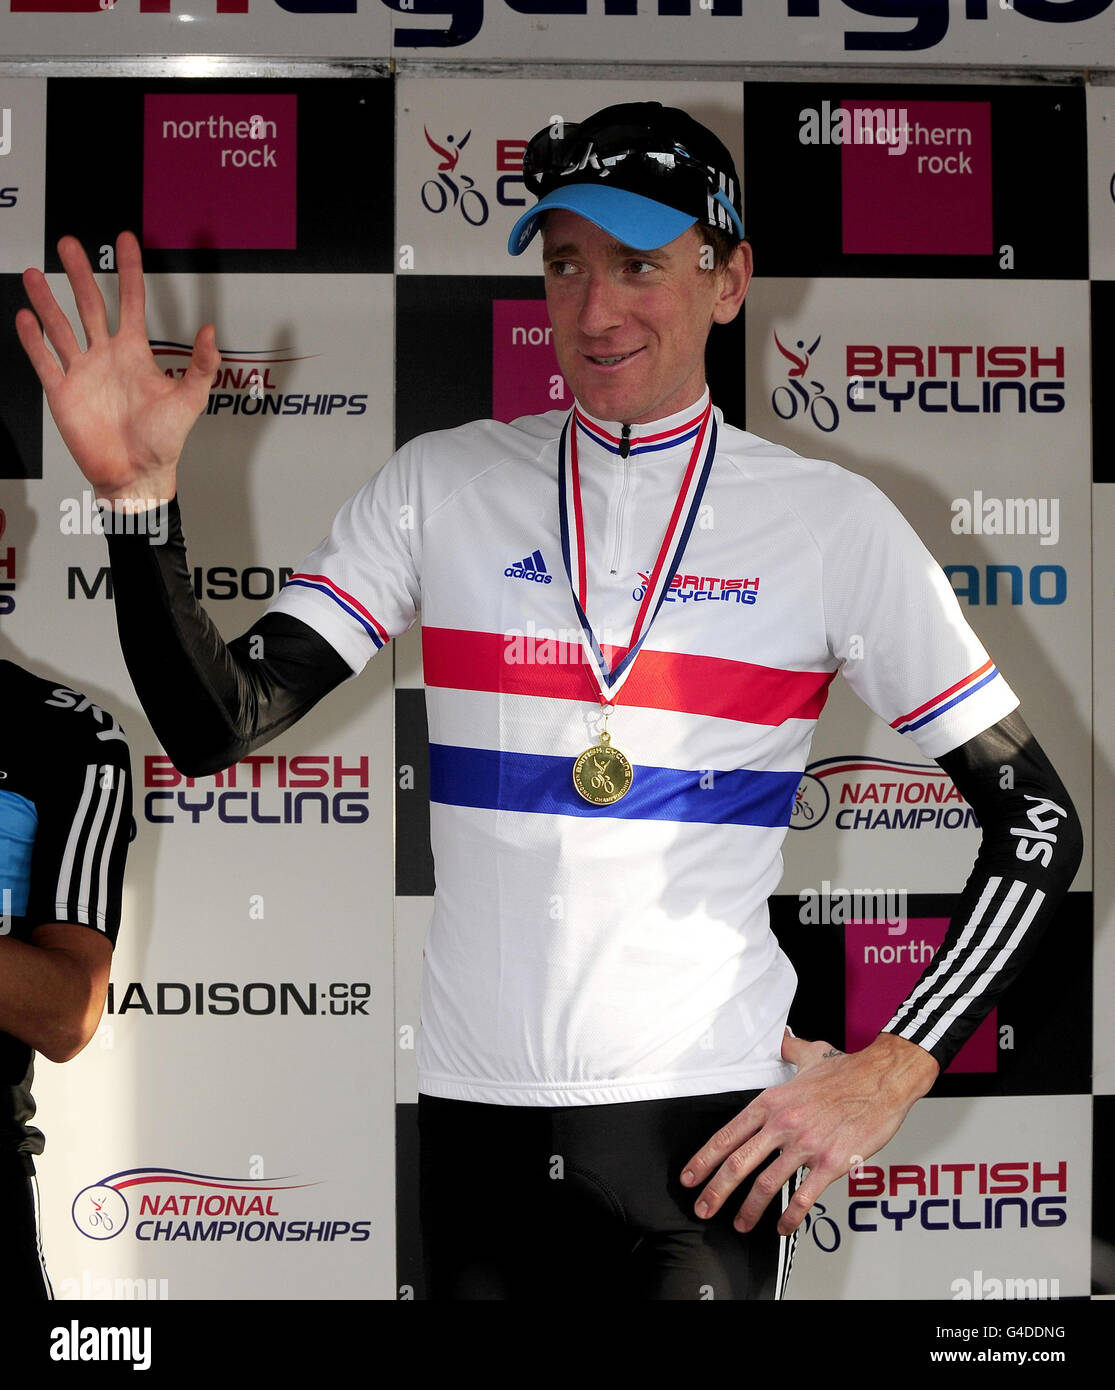 Bradley Wiggins in his National Champions Jersey following his victory in the Men's National Elite Road Race Championships in Stamfordham. Stock Photo